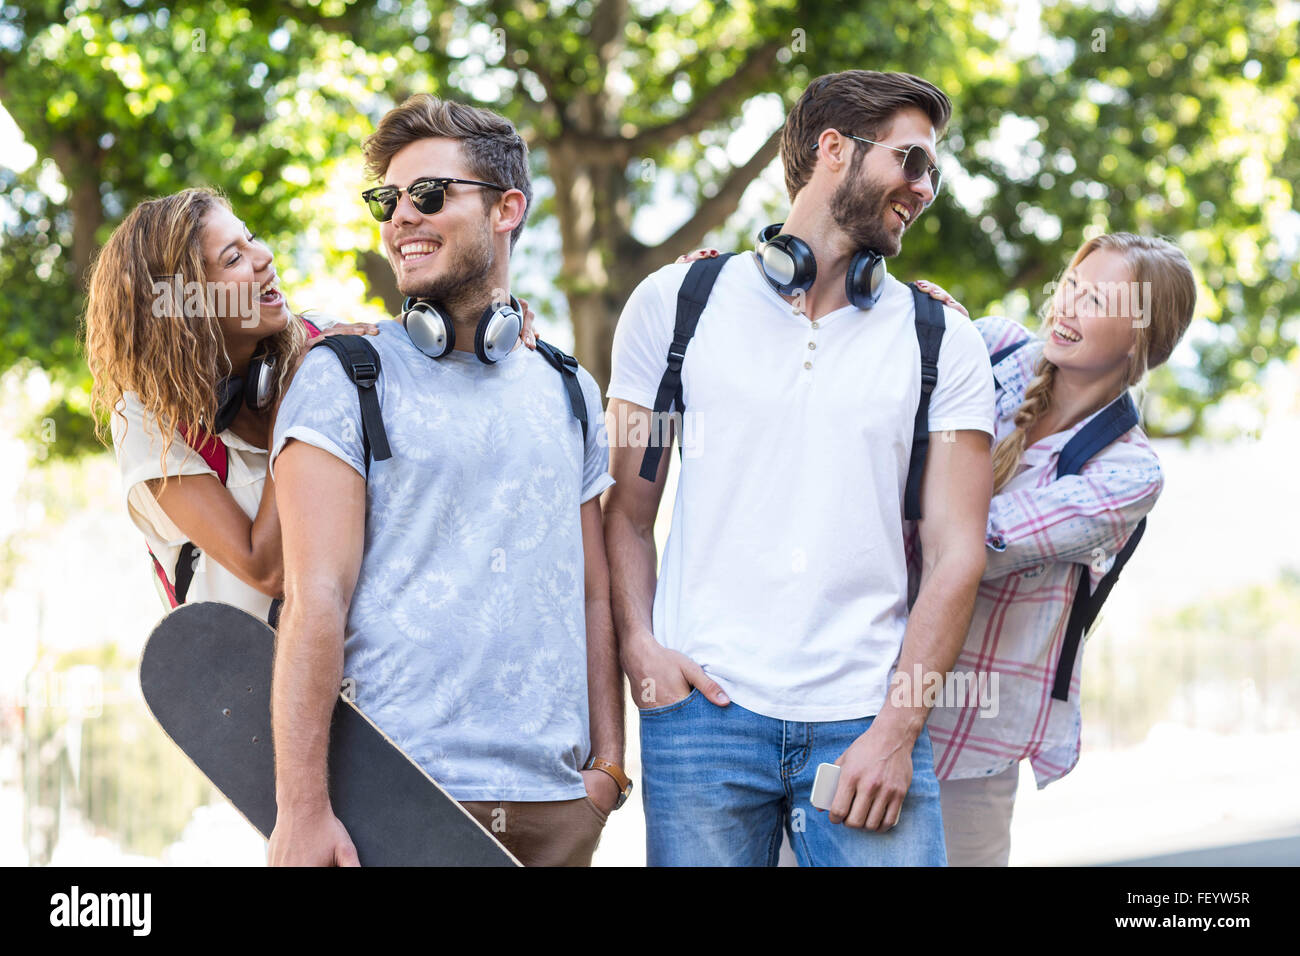 Hi friends spending time together Stock Photo